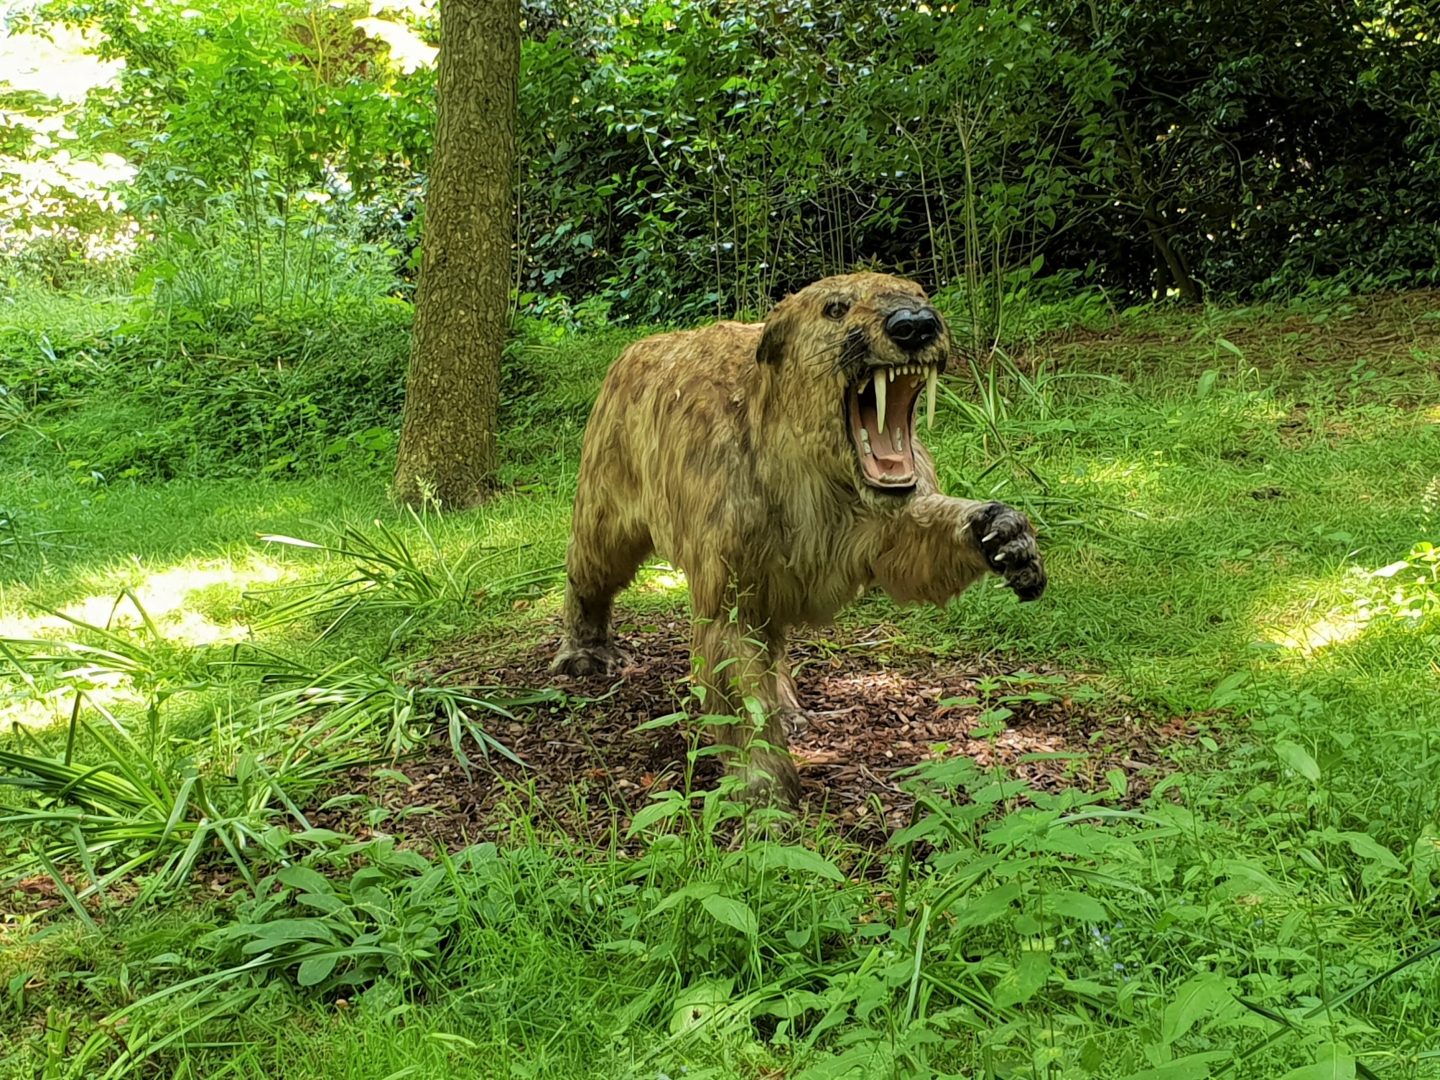 Sabre toothed tiger, Ice Age exhibition at Howletts Wild Animal Park